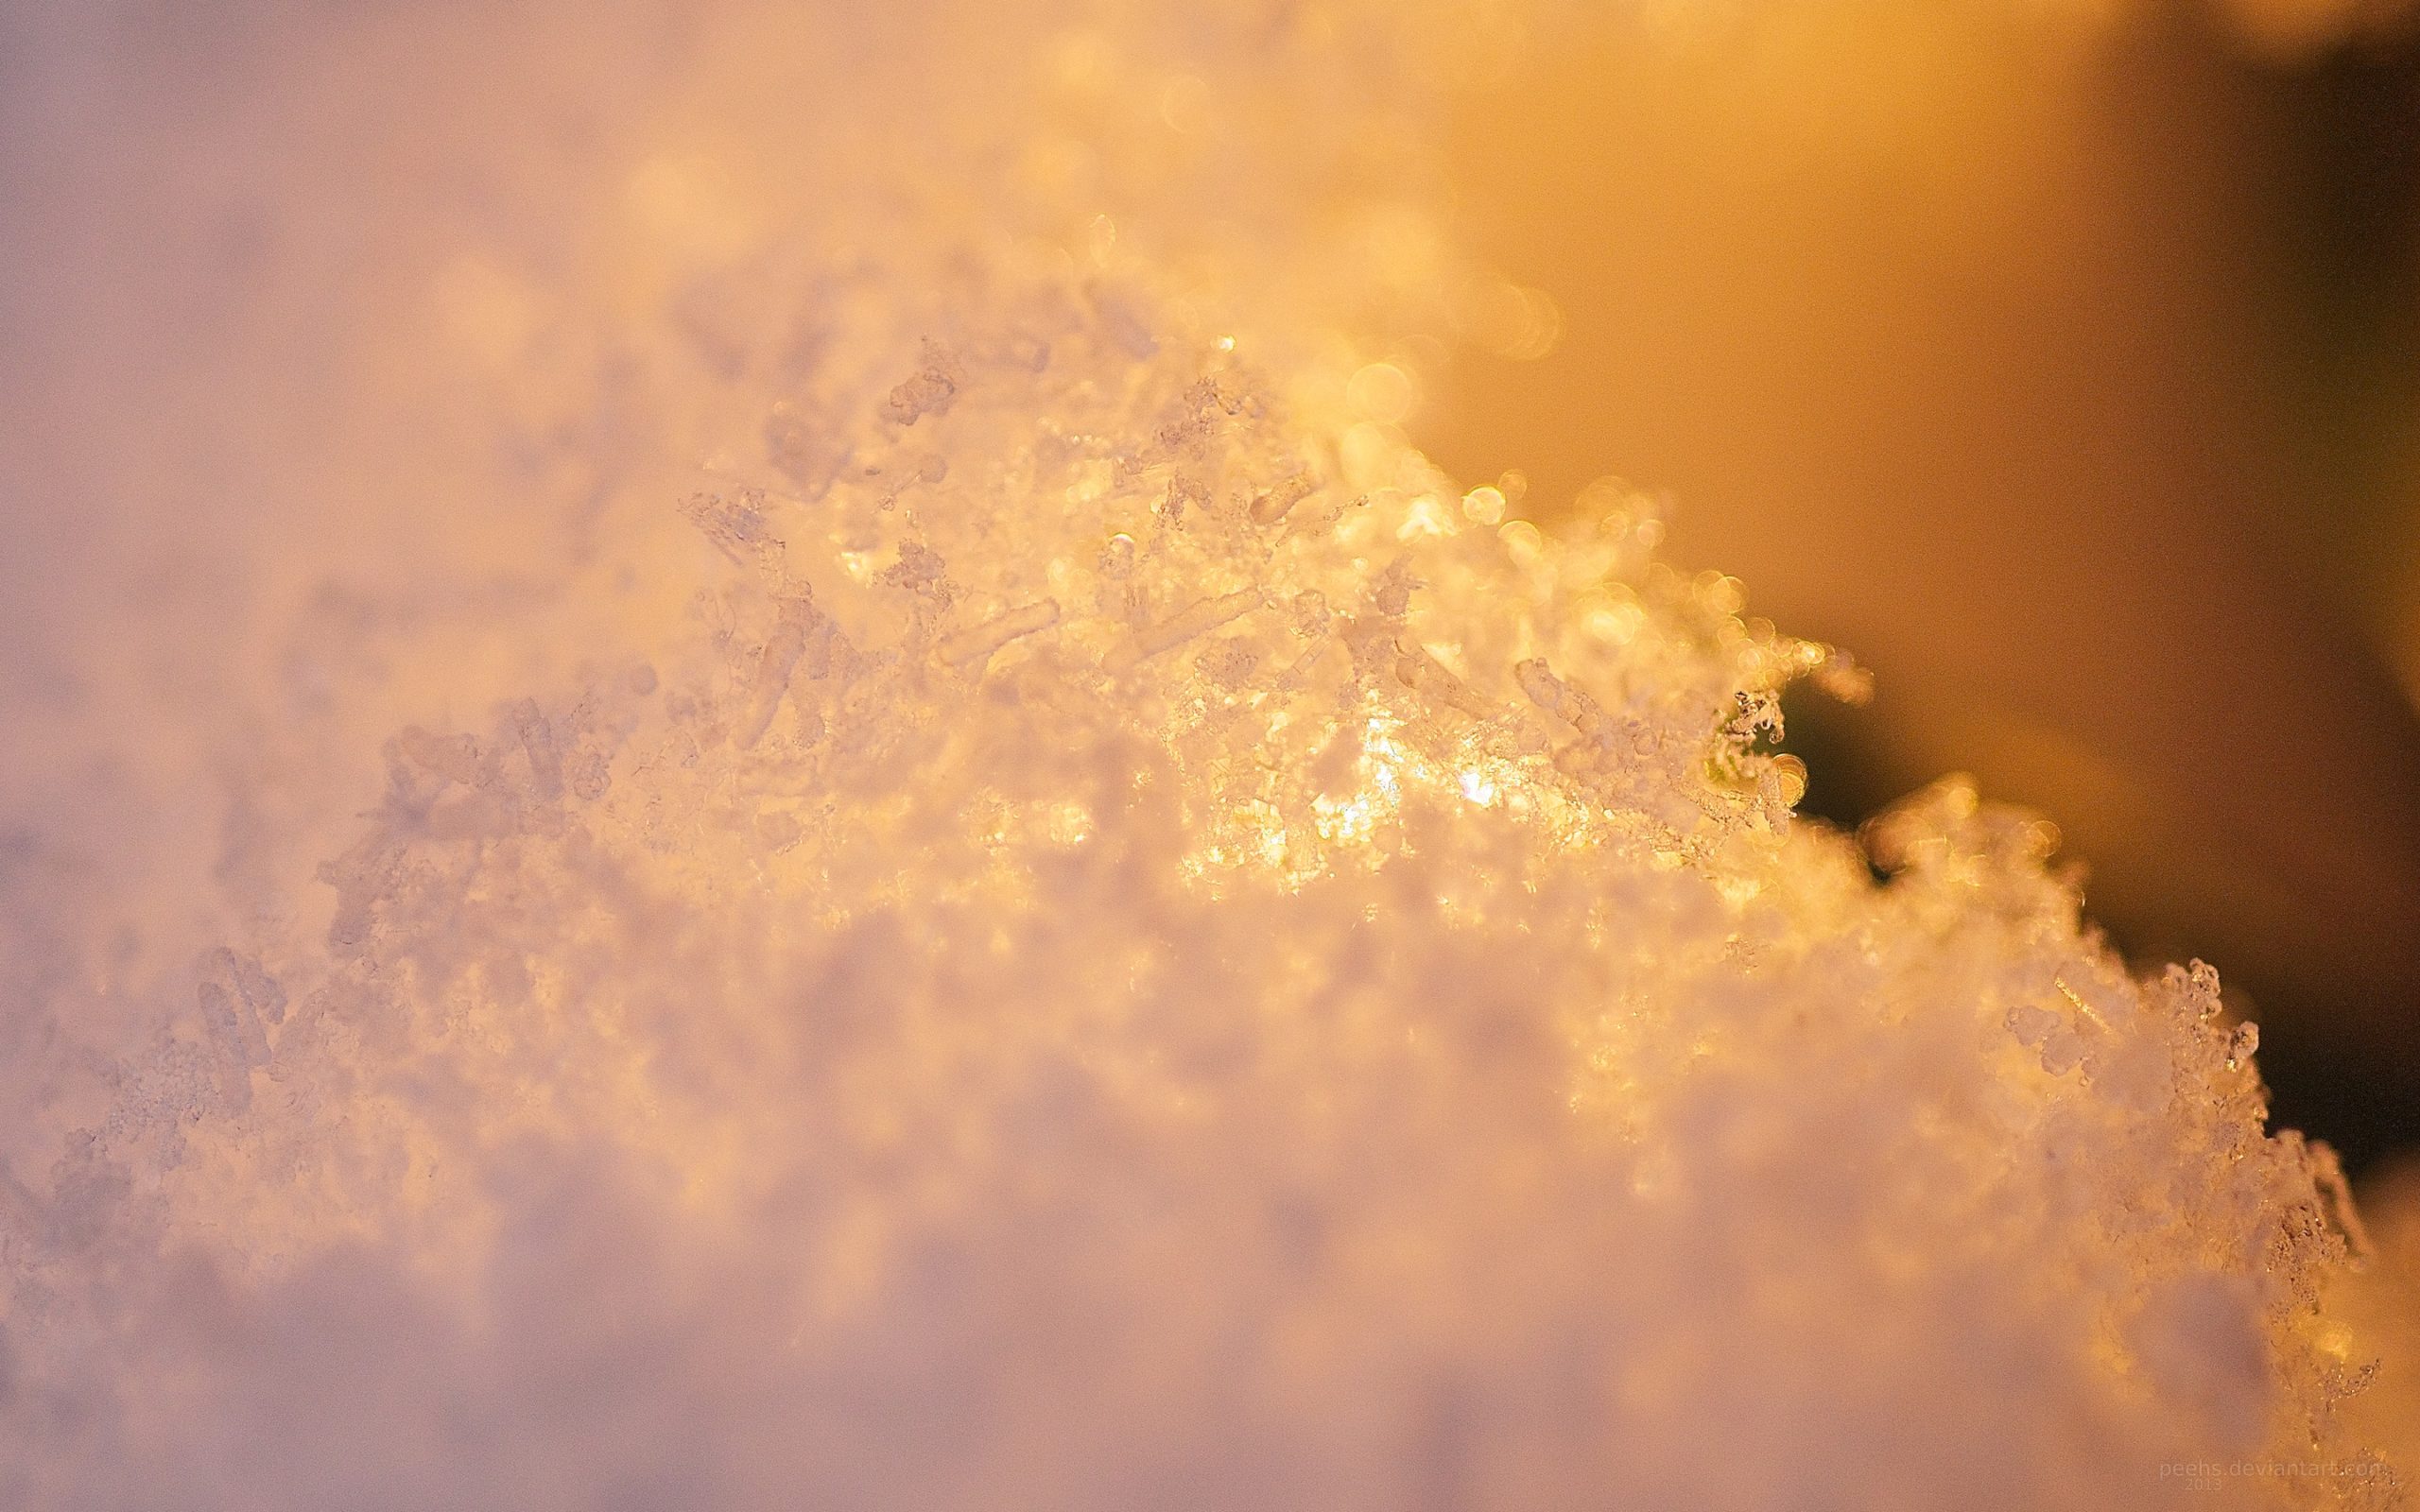 Weekly Wallpaper: Get Extra Close With These Macro Photos